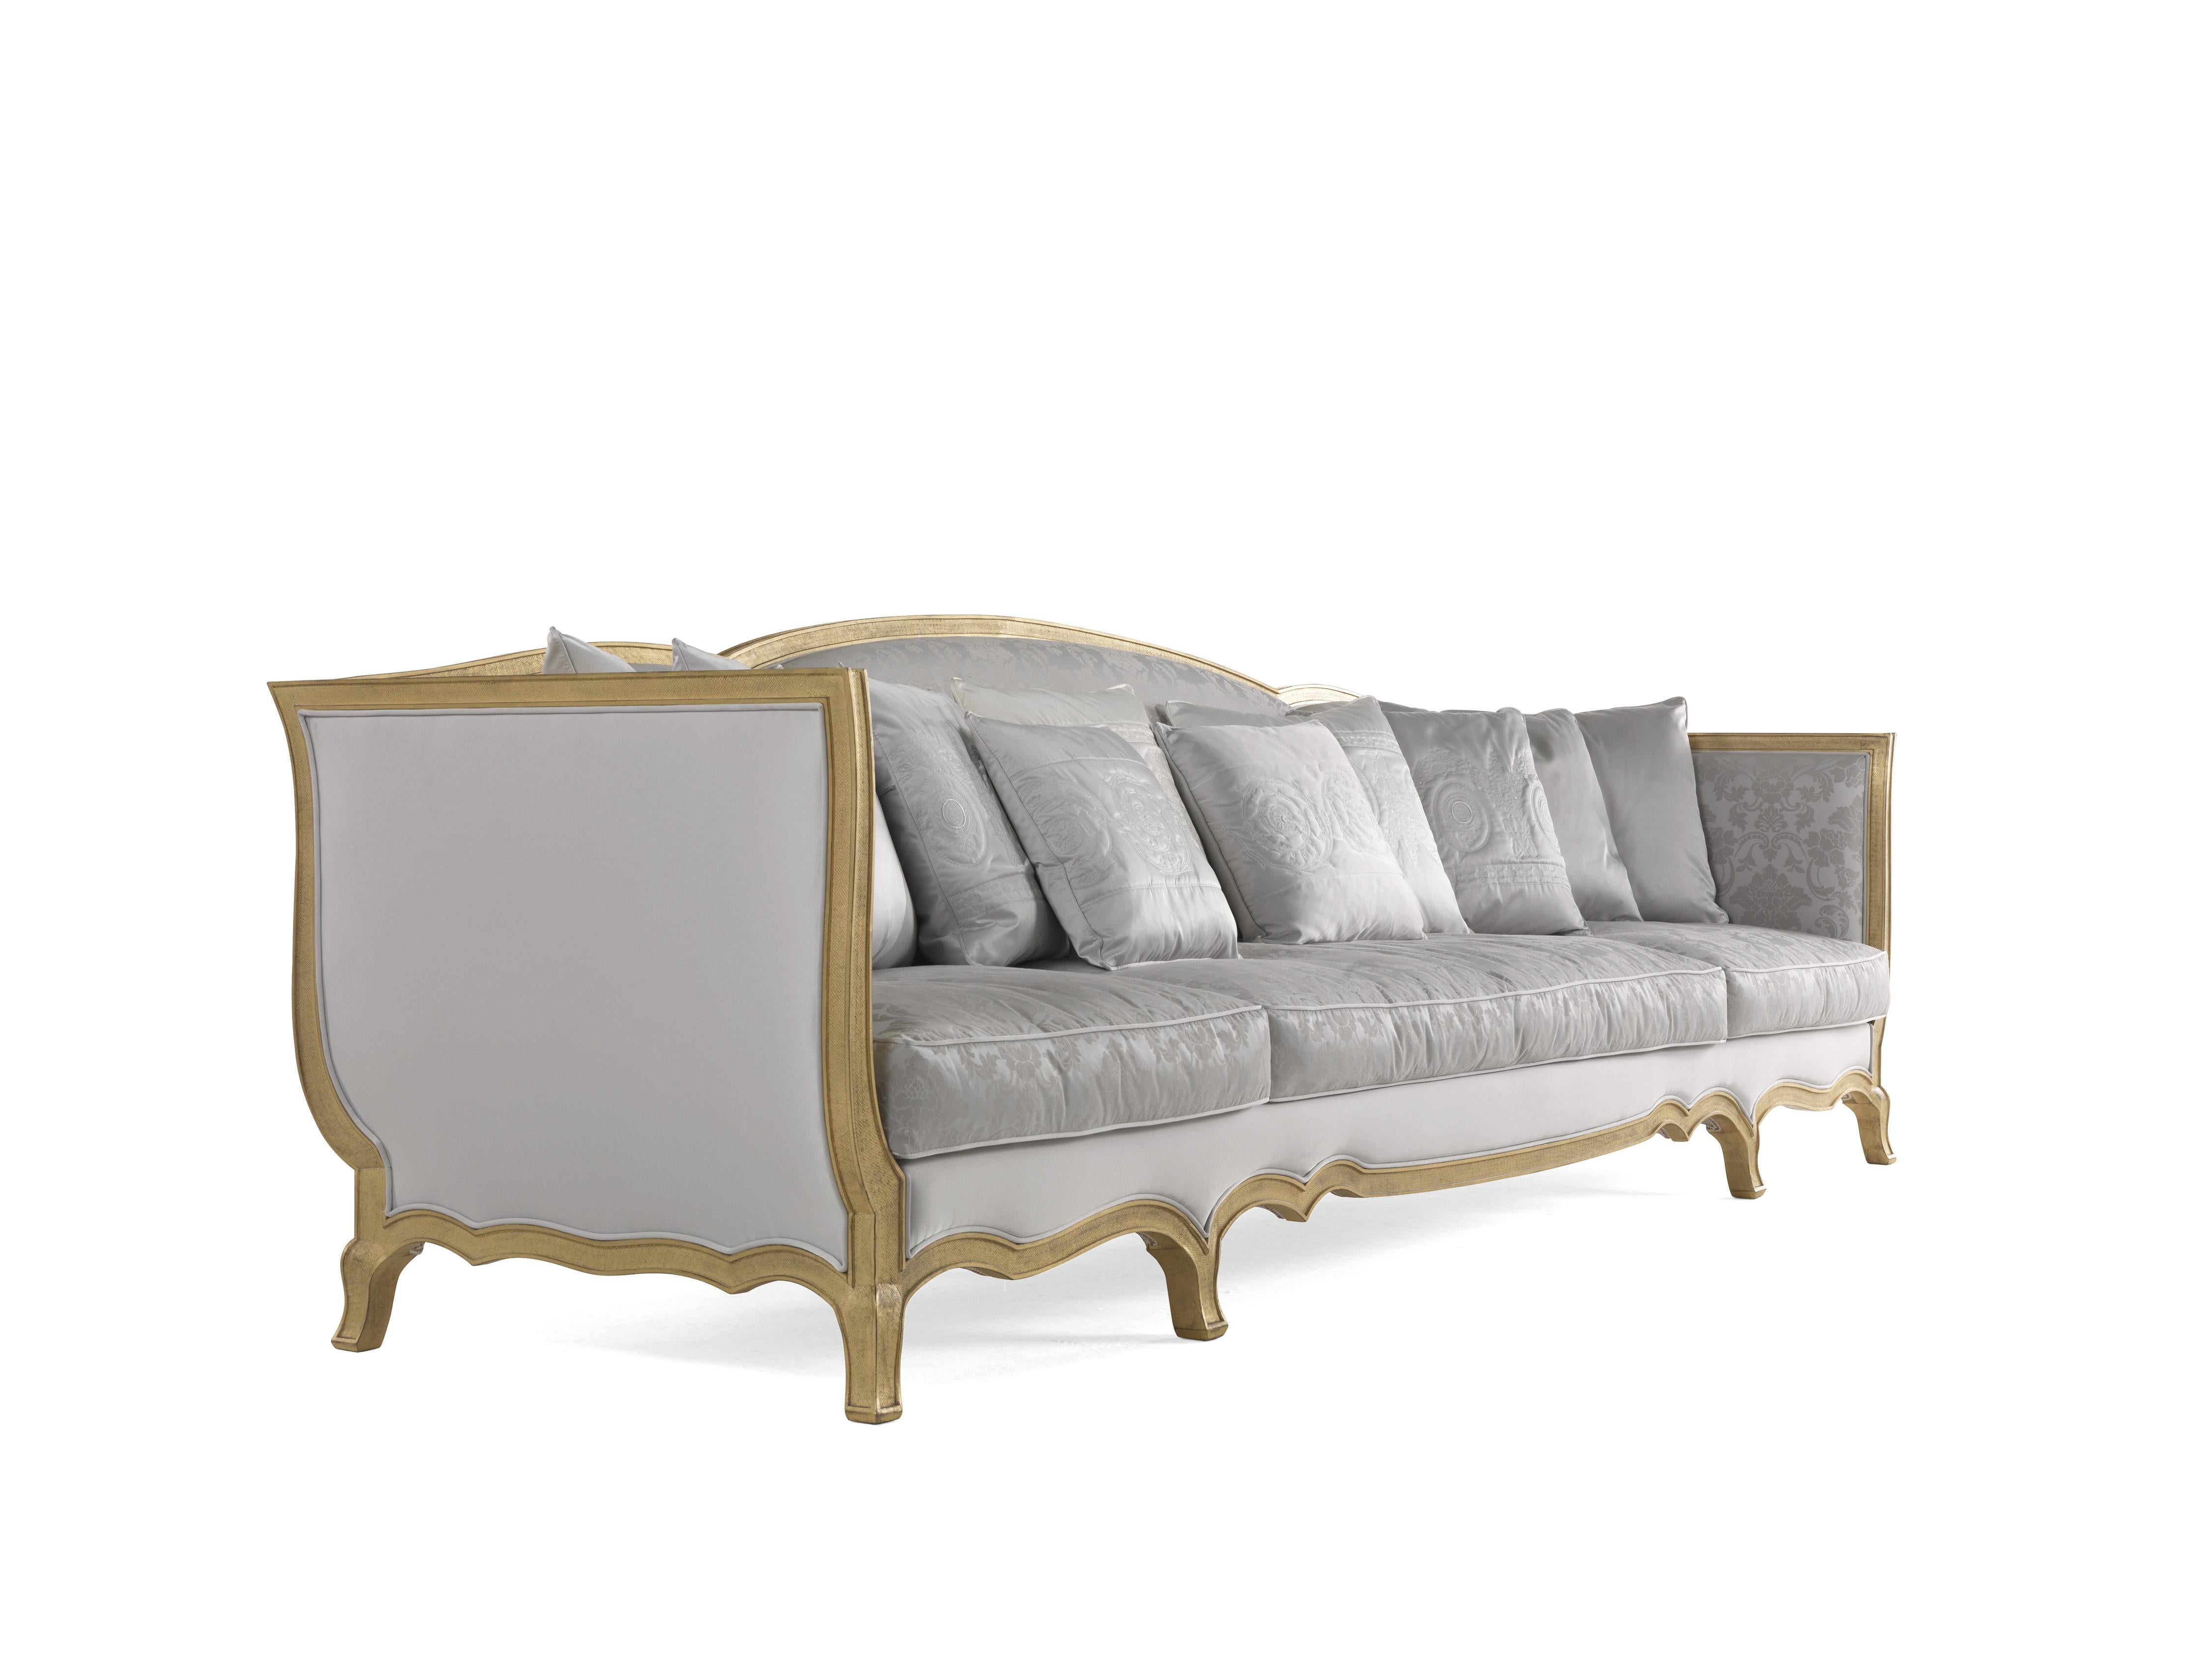 GrandCamée is the perfect expression of a bright classic style, where the refined upholstery in the precious fabric of the collection meets the decorative charm of the structure with a finish in antique gold with patina.
Grandcamée 3-seater sofa